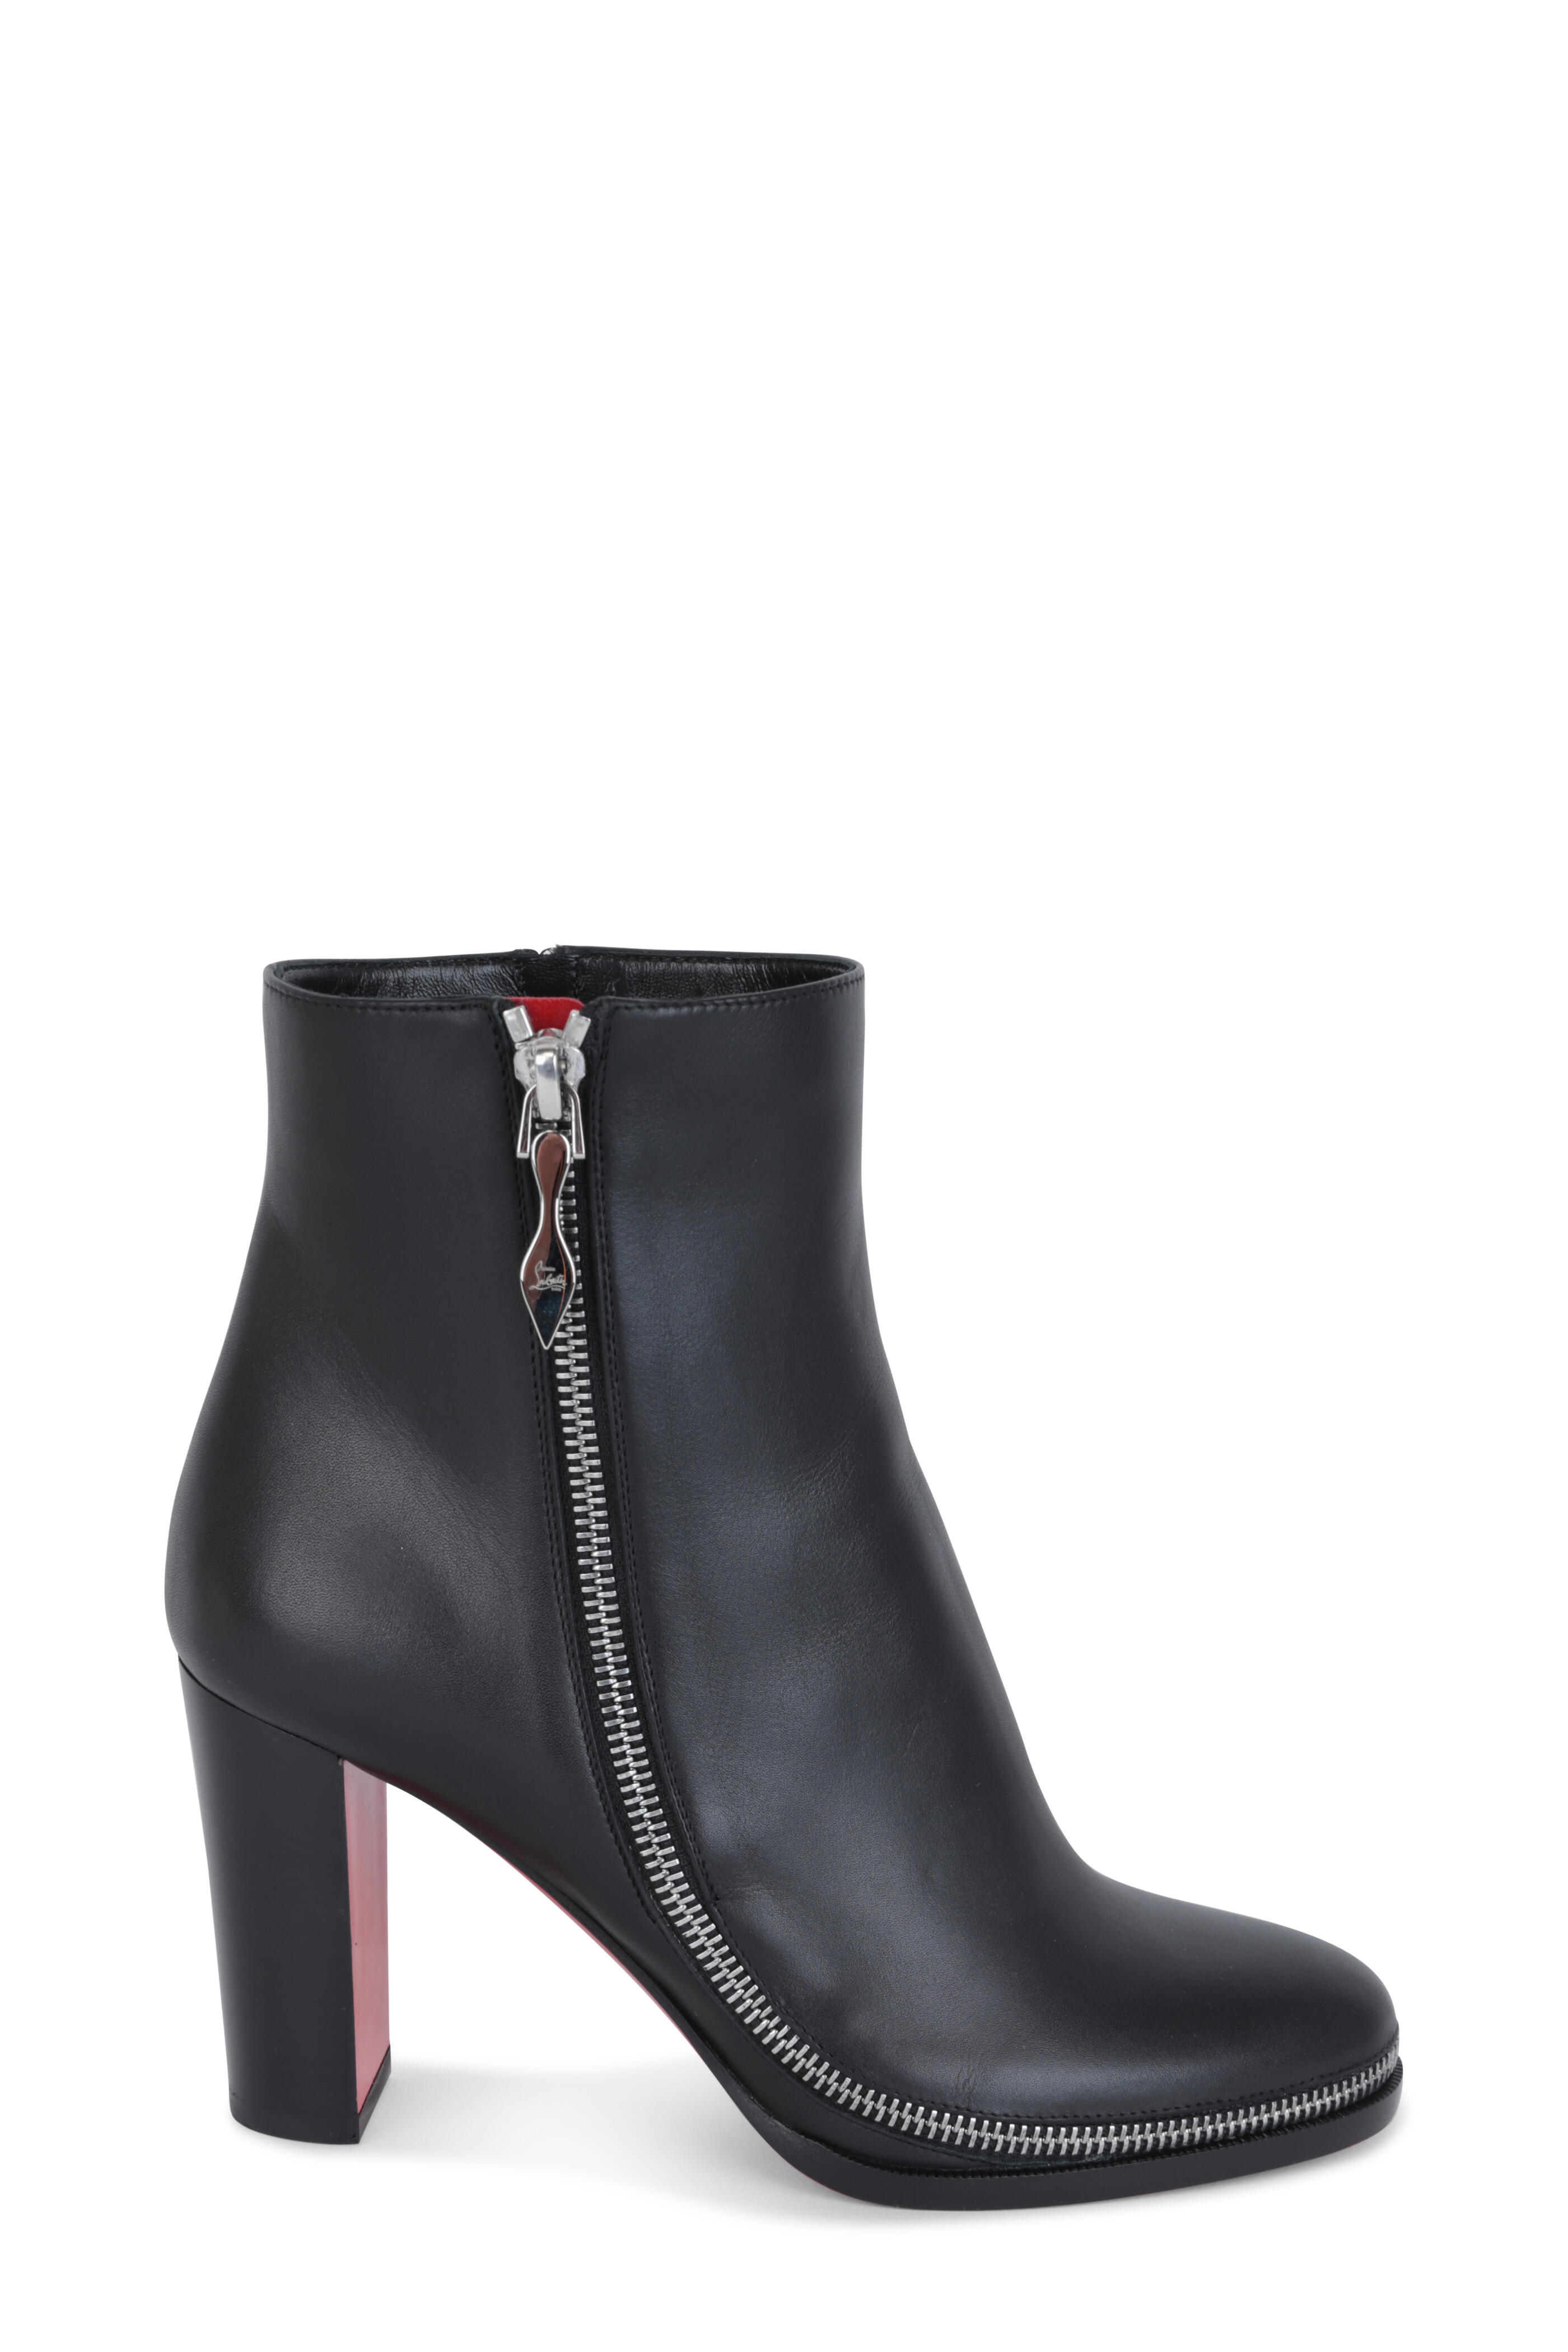 Christian Louboutin Ziptotal 55 Leather Ankle Boots in Black